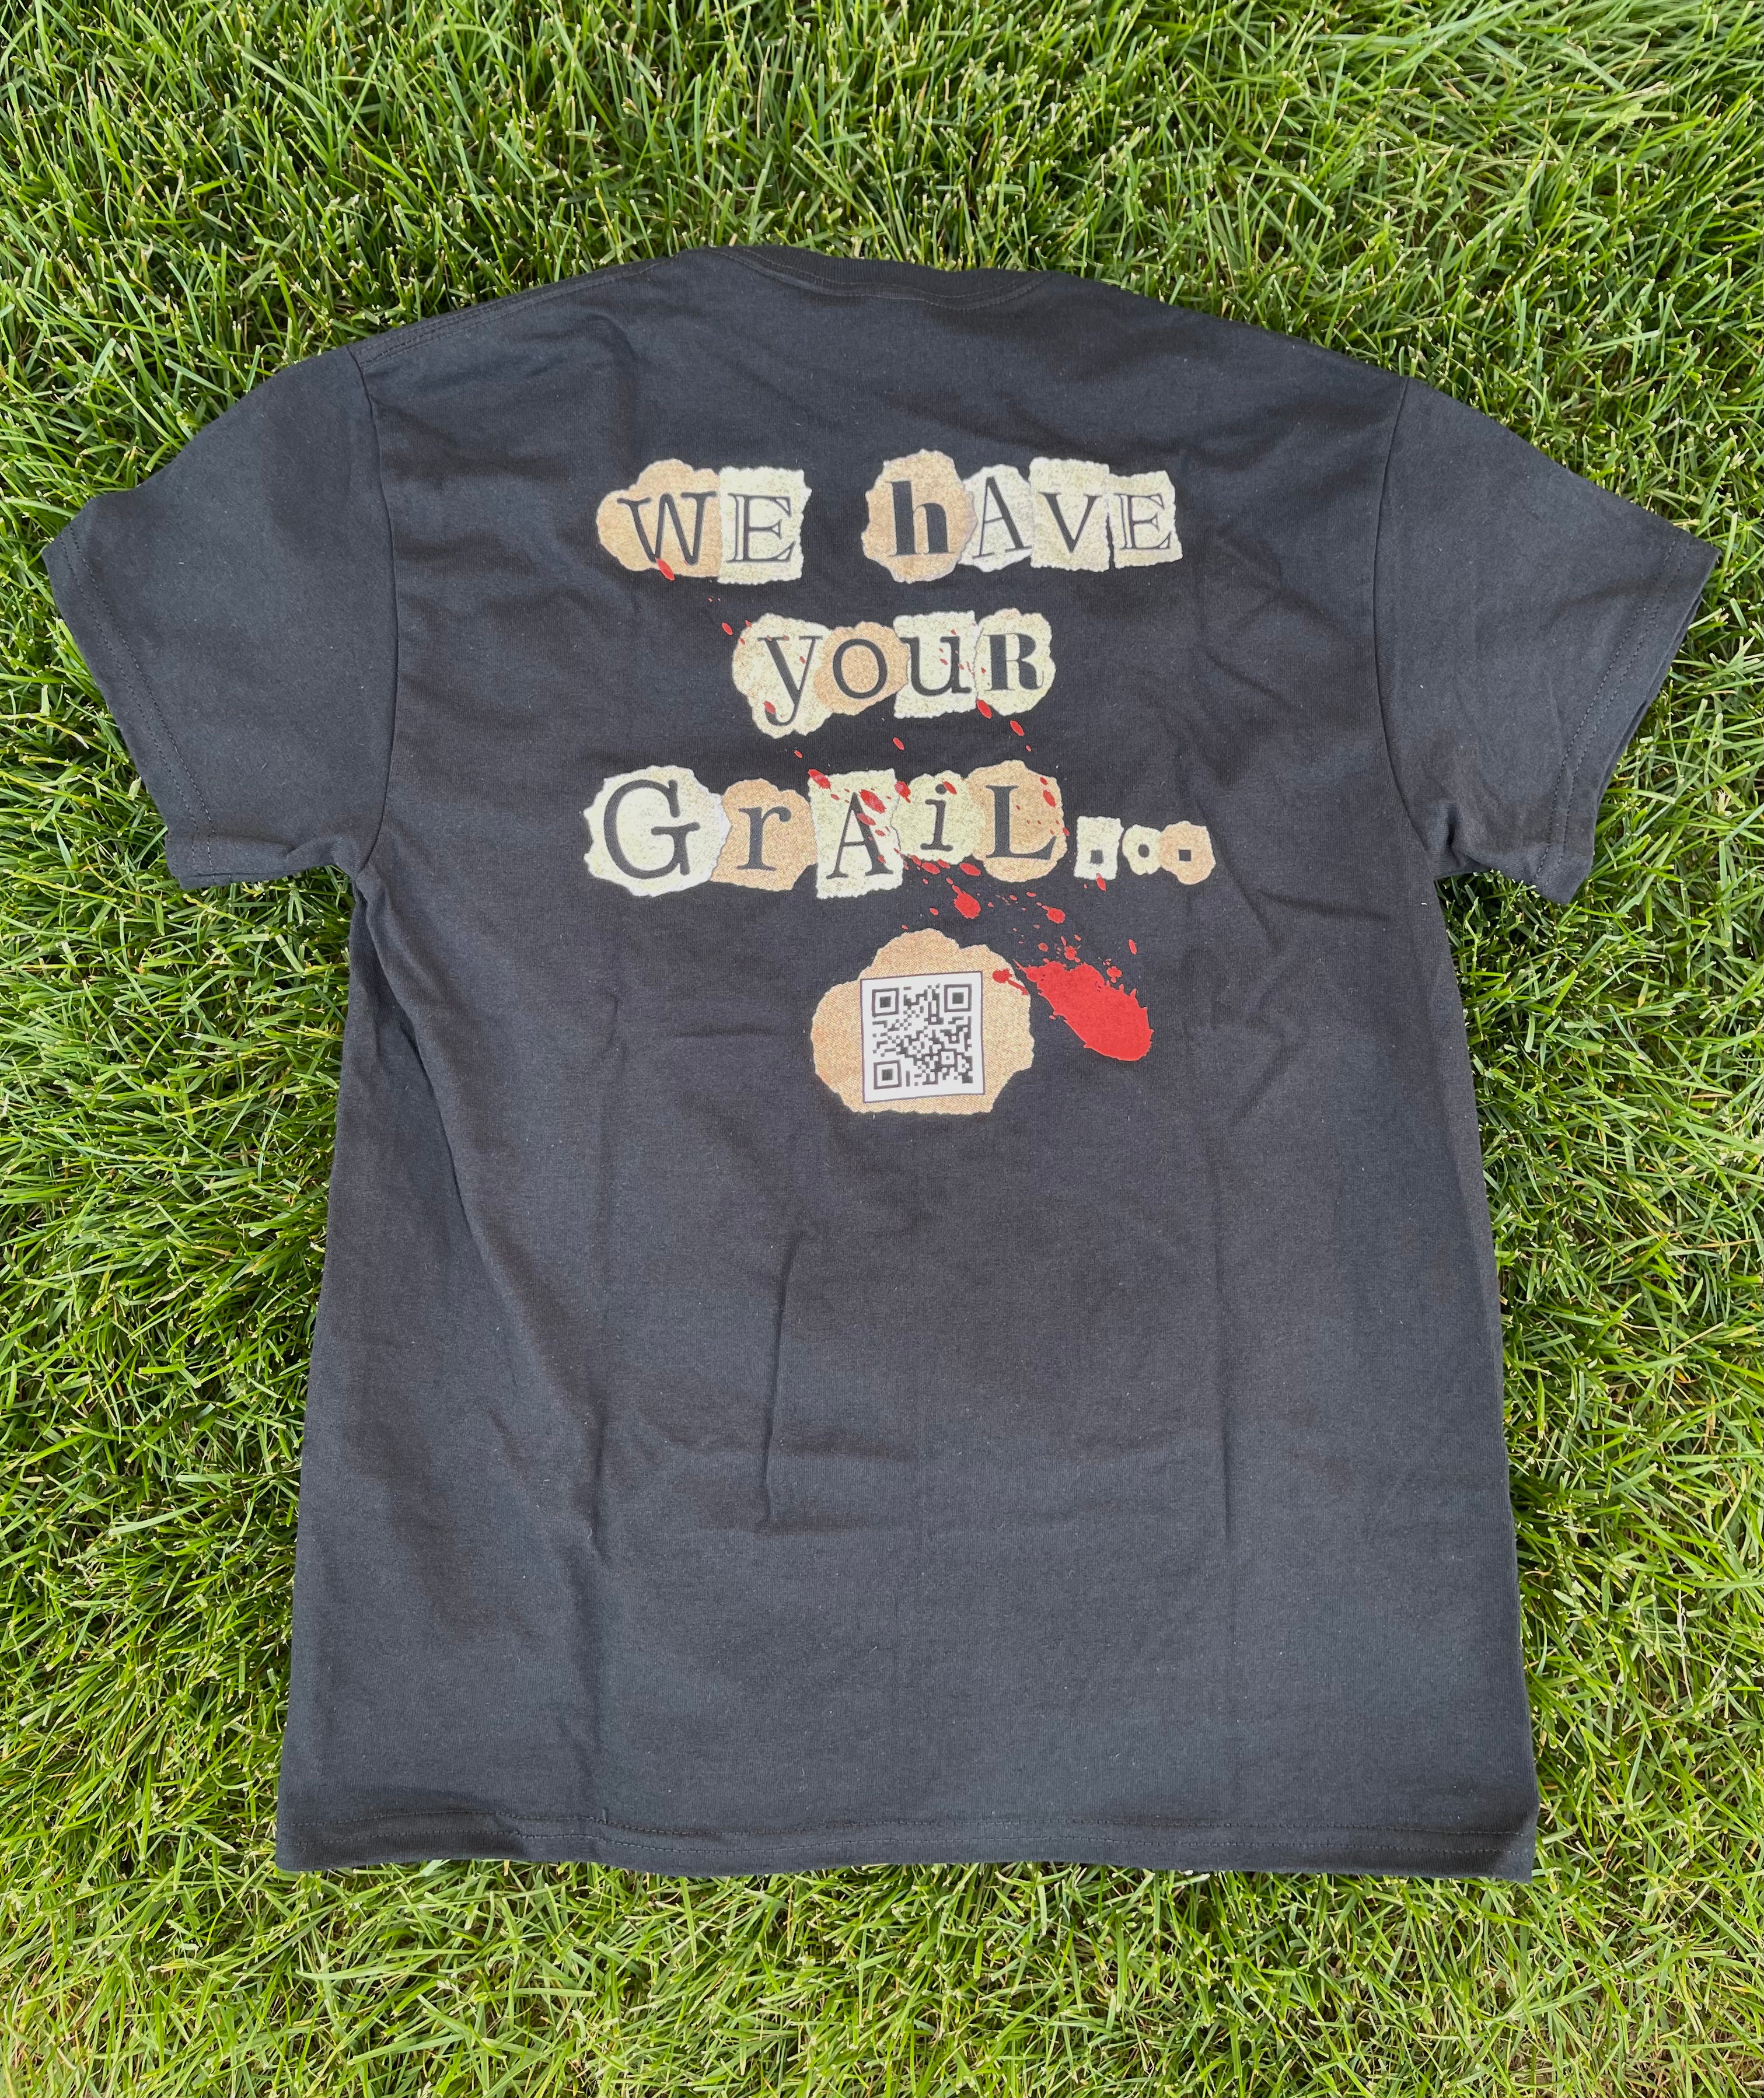 Grails Inc Ransom Note Tee